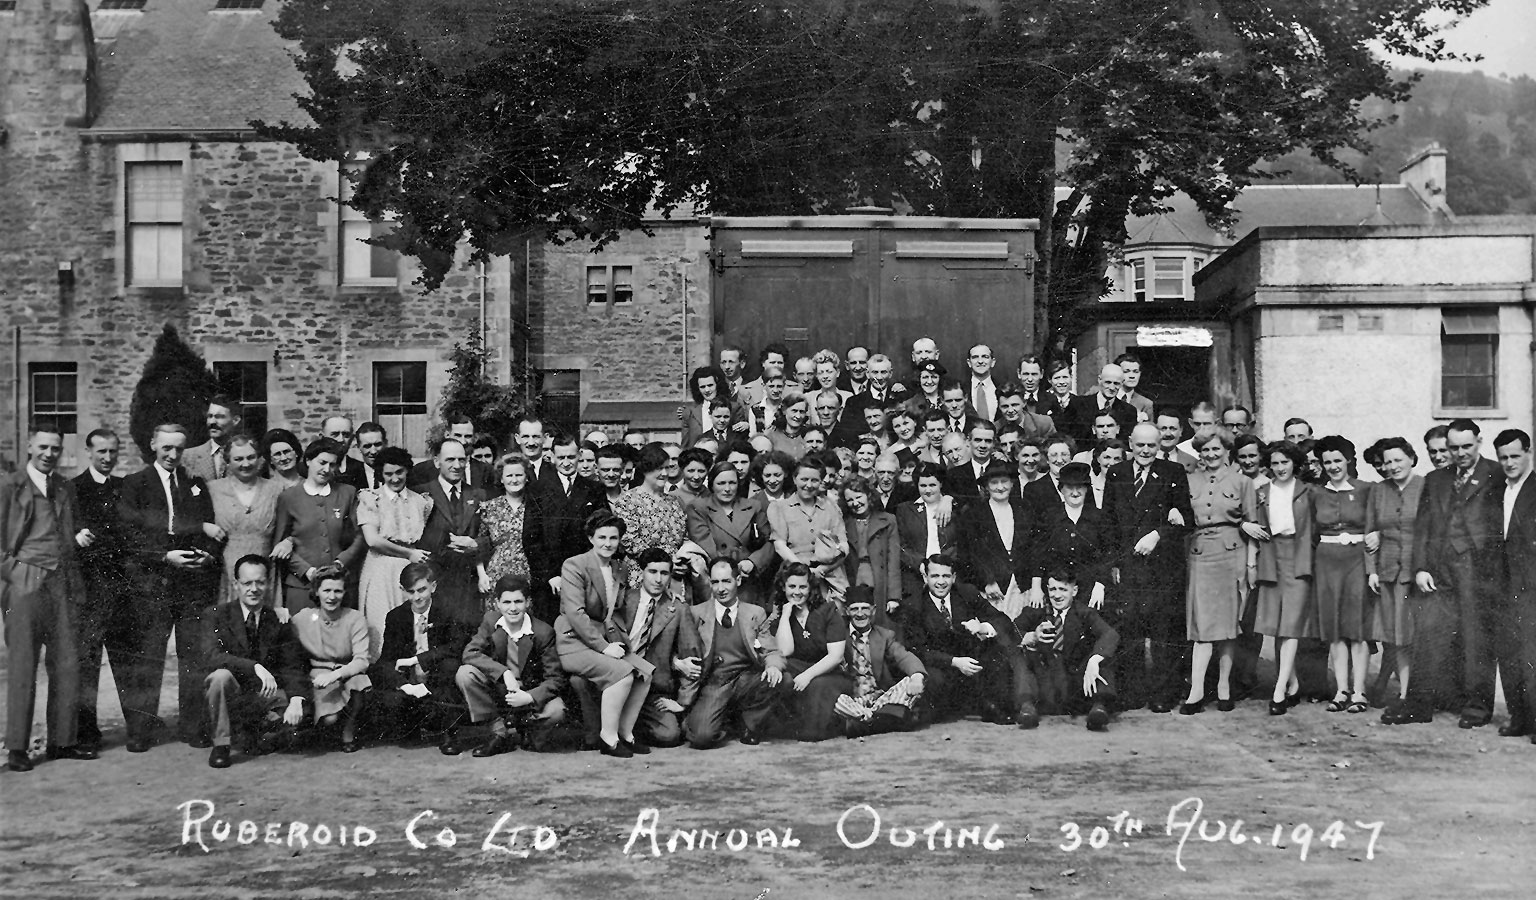 Ruberoid & Co Ltd  -  Annual Outing, 30 August 1947